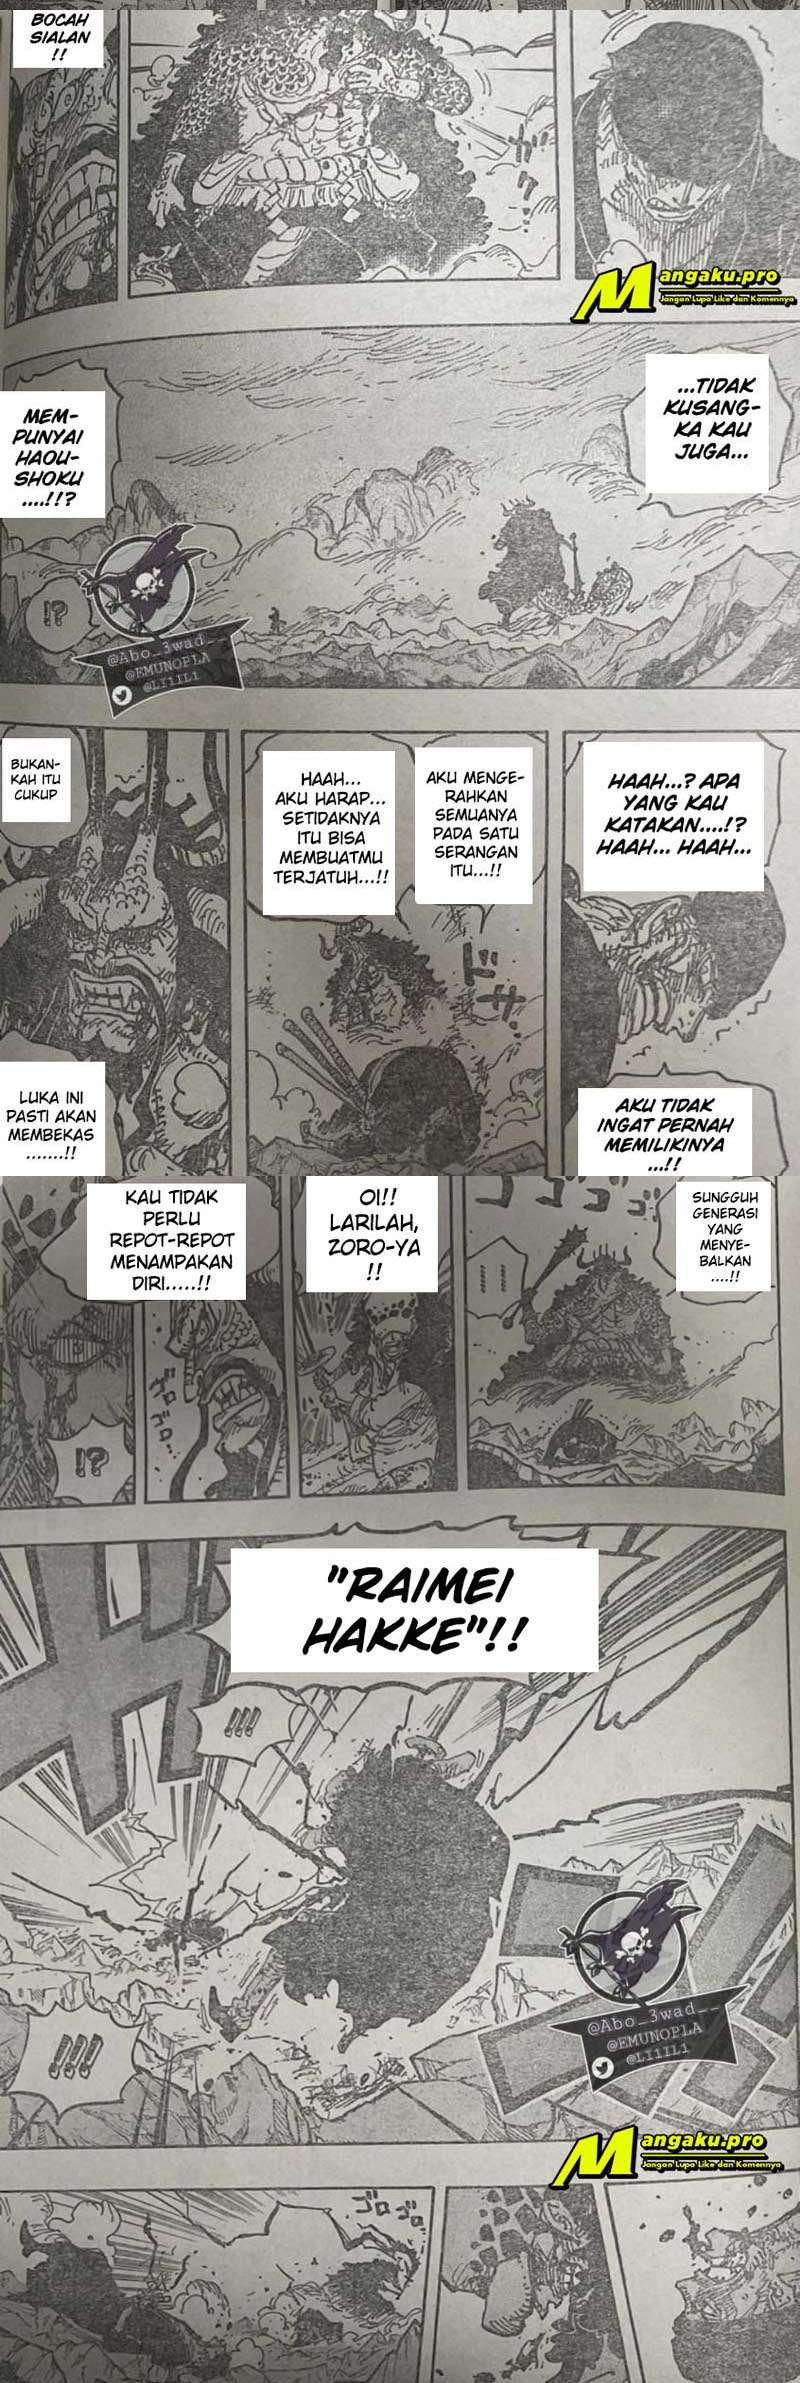 One Piece Chapter 1010 lq Image 5